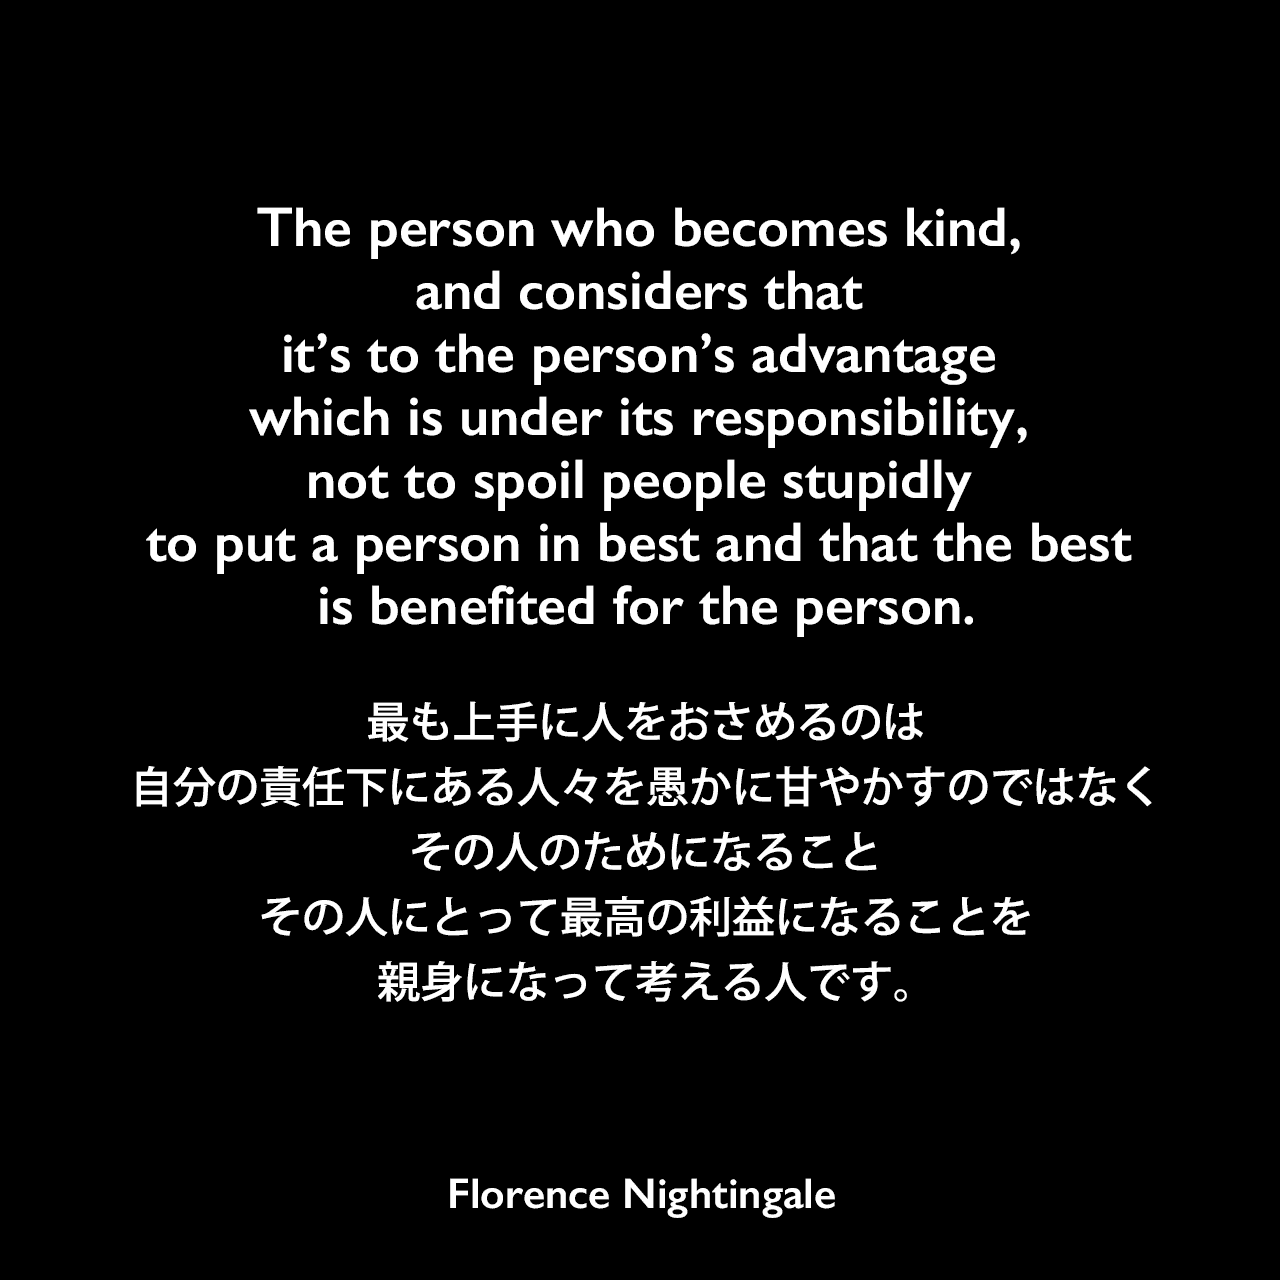 The person who becomes kind, and considers that it’s to the person’s advantage which is under its responsibility, not to spoil people stupidly to put a person in best and that the best is benefited for the person.最も上手に人をおさめるのは、自分の責任下にある人々を愚かに甘やかすのではなく、その人のためになること、その人にとって最高の利益になることを、親身になって考える人です。Florence Nightingale